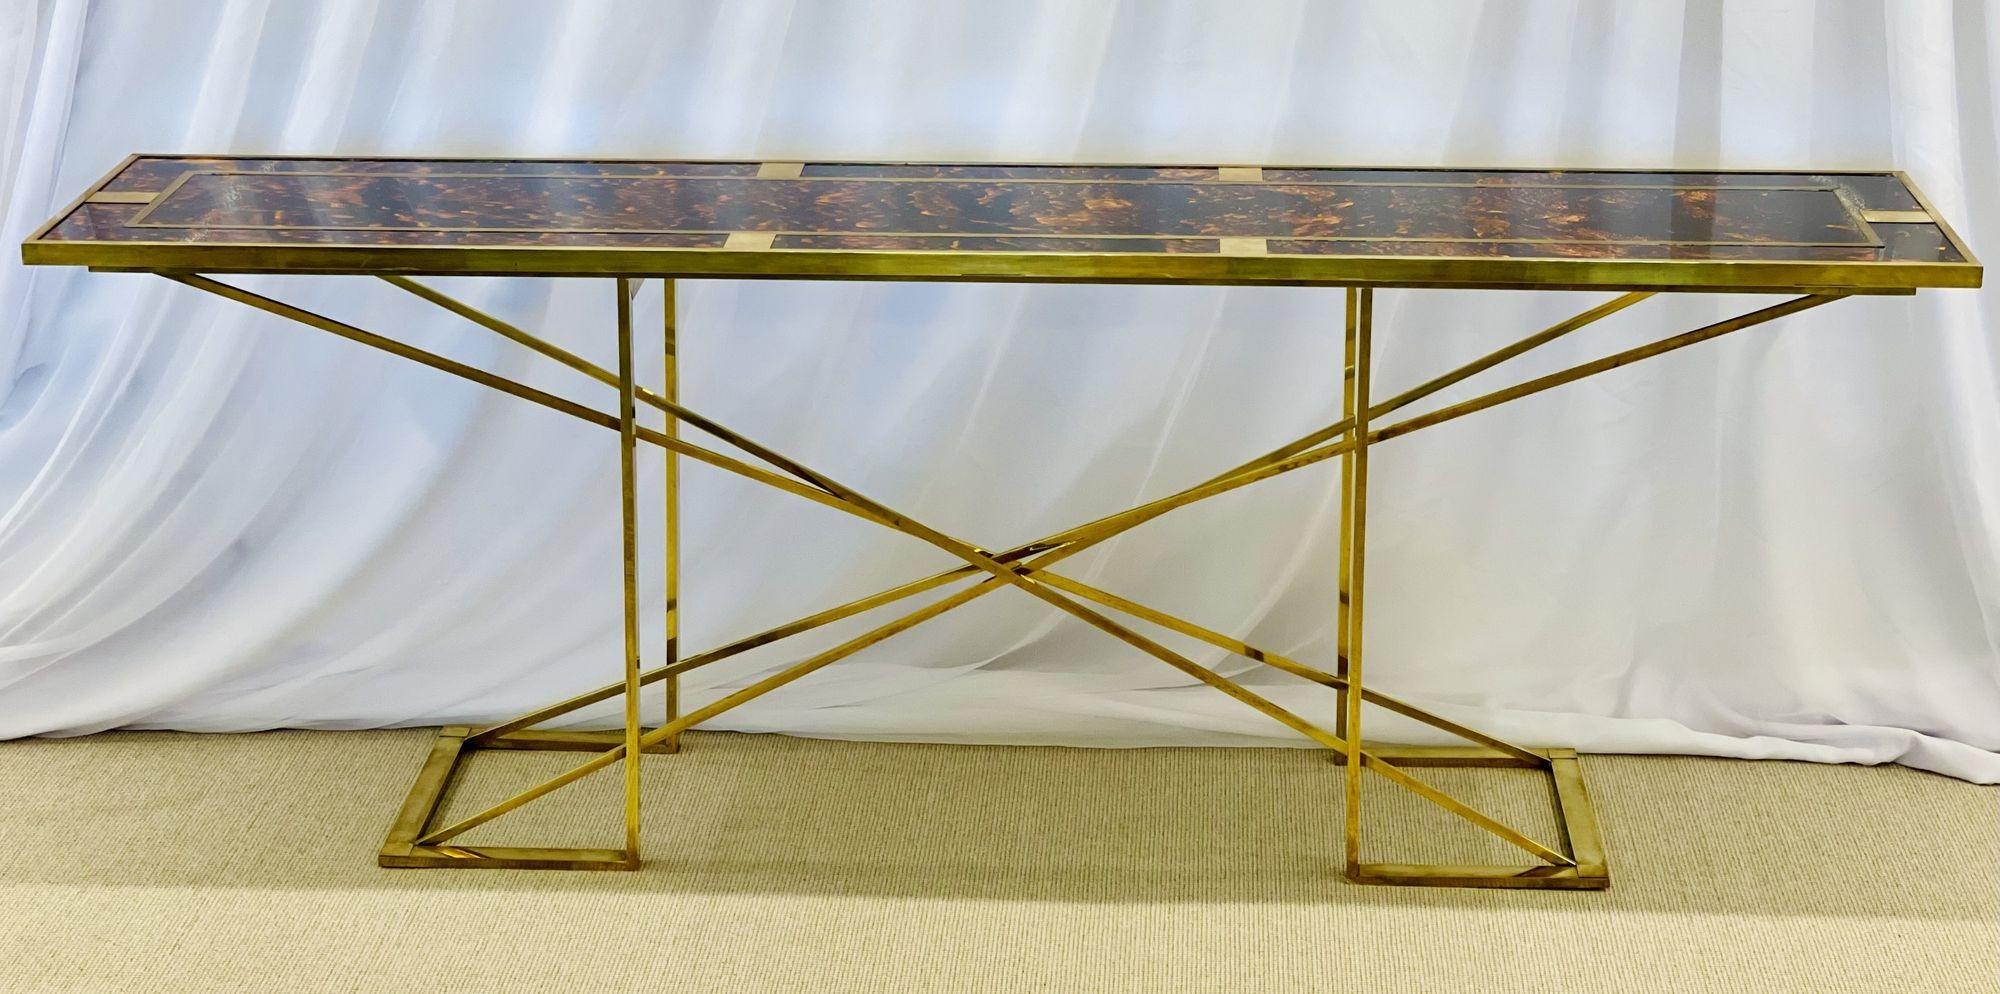 A Modern Romeo Rega console table or sideboard 1970s, faux tortoise top, gilt metal base.
 
The gilt metal exagerated X form geometric base supporting a faux tortoise shell style table top with brass inlays. This stunning piece is possibly the